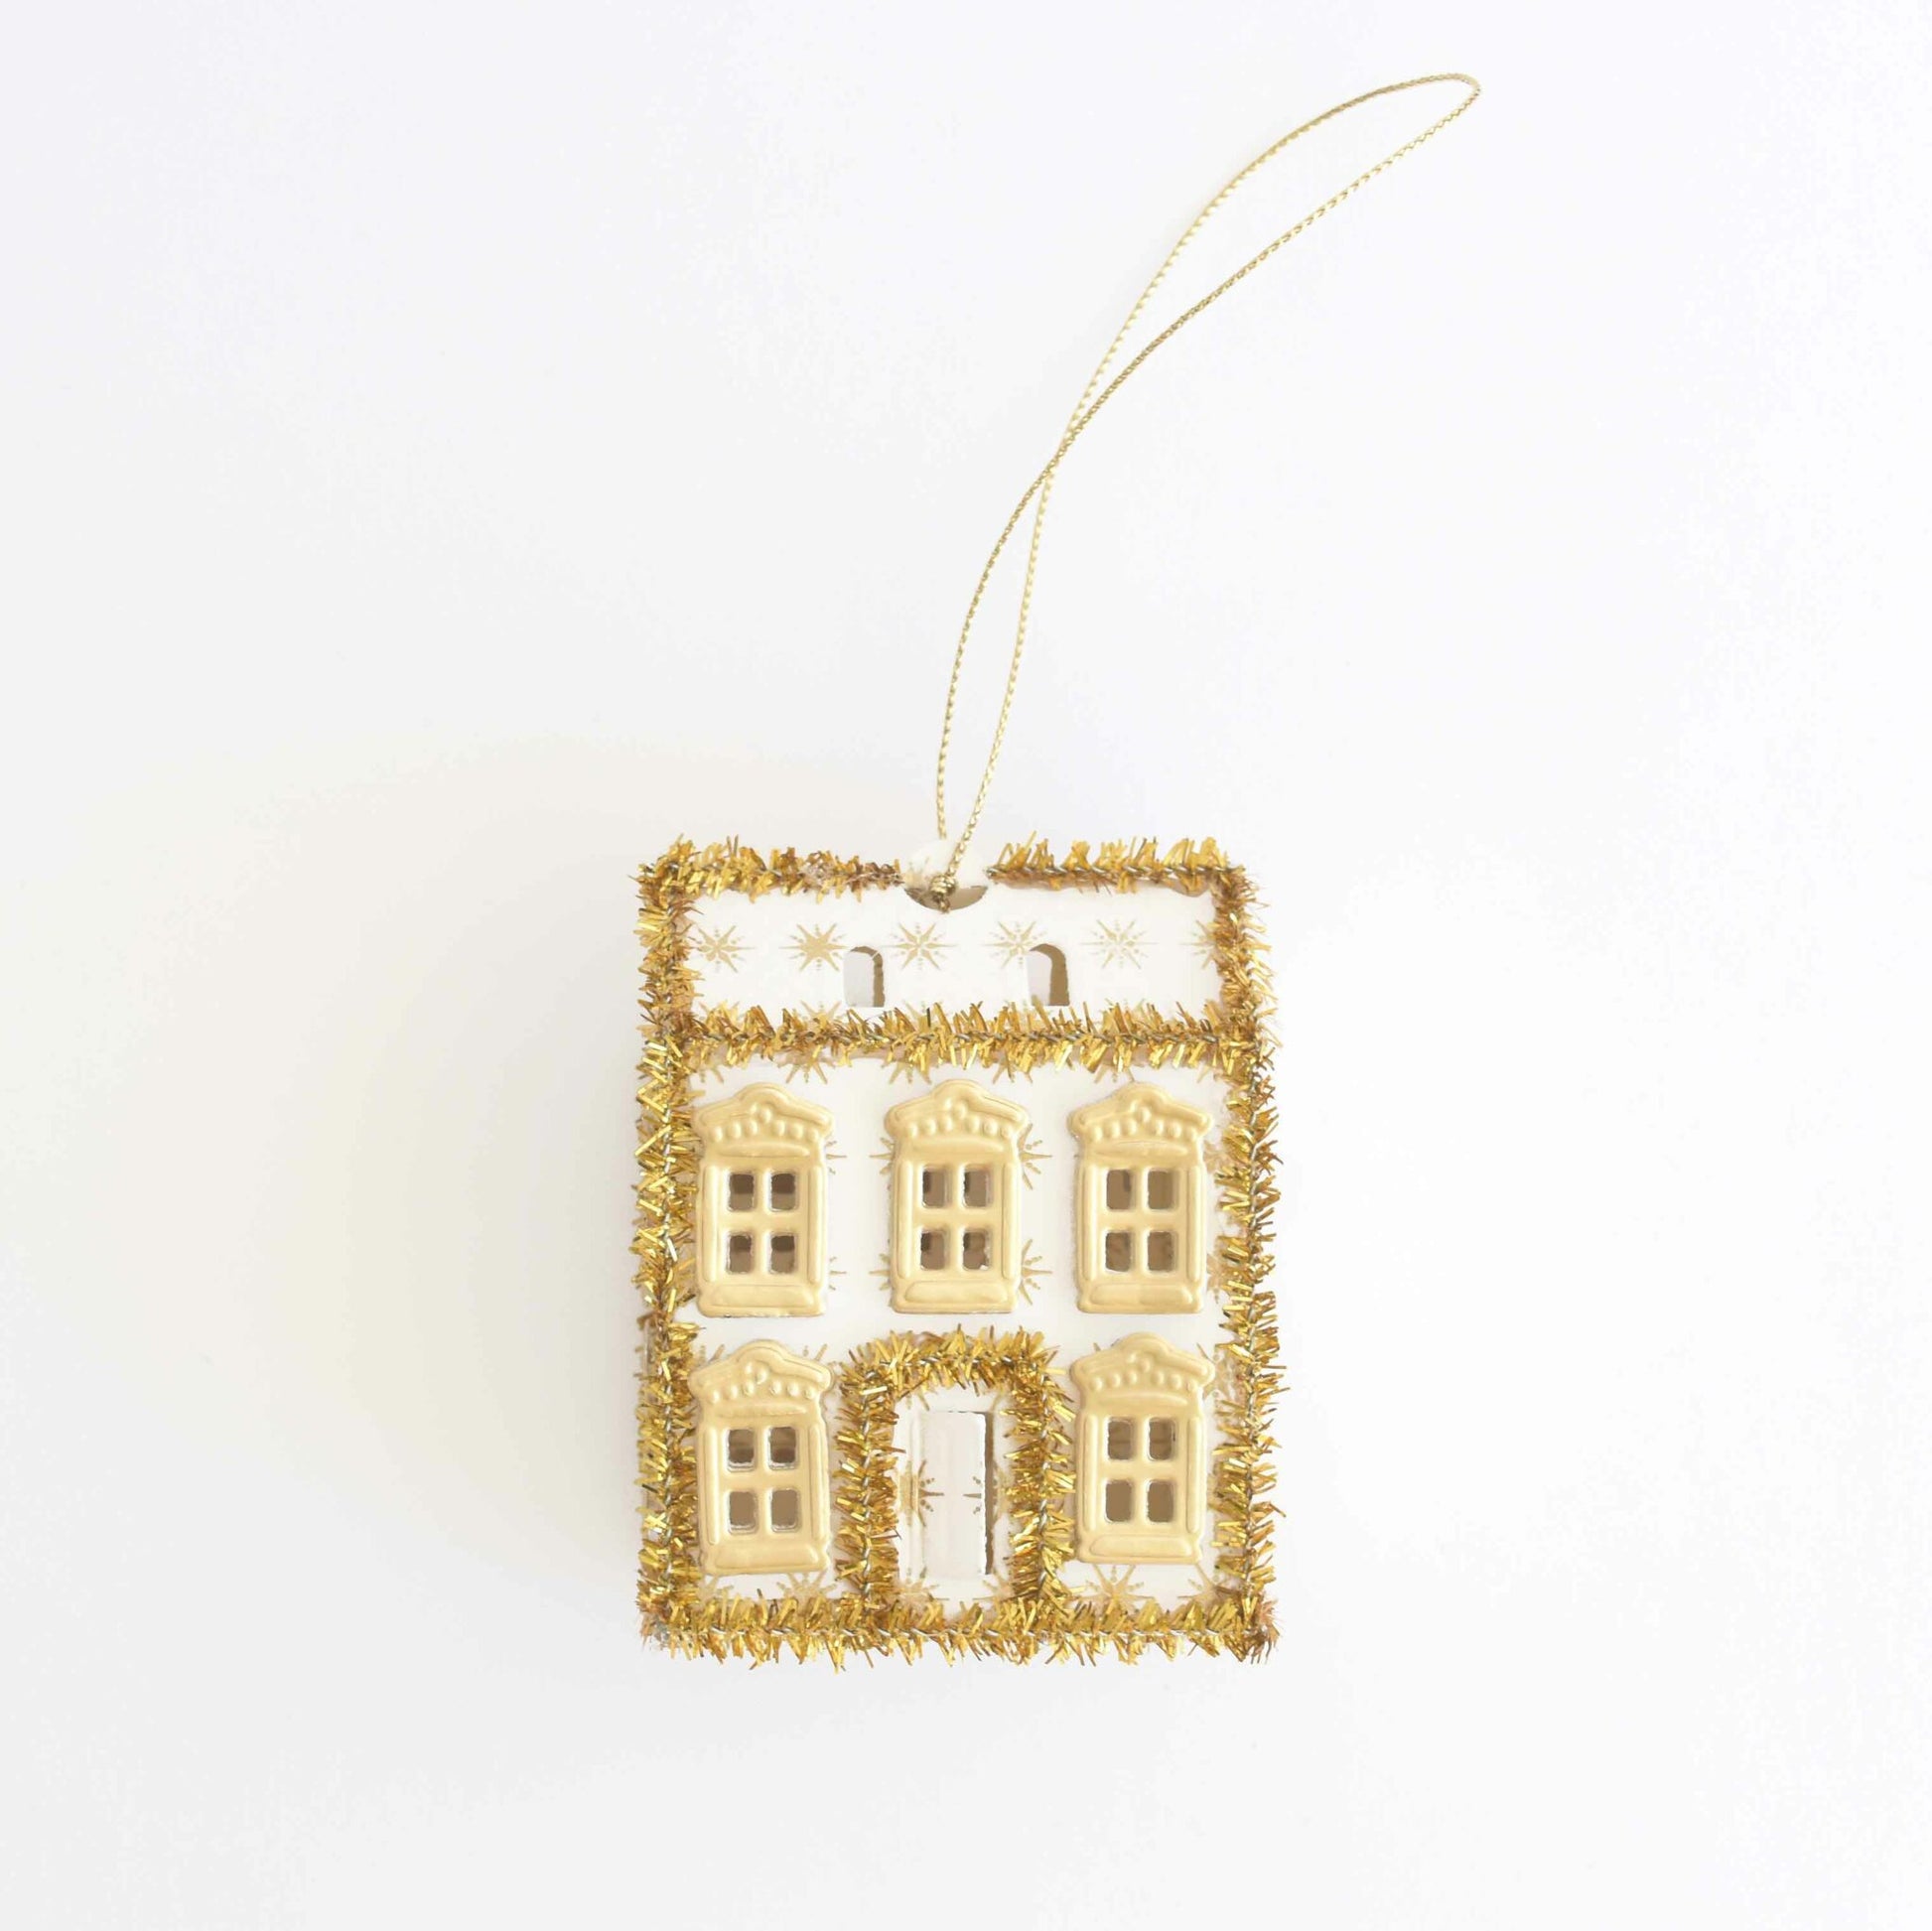 a white and gold ornament hanging from a string.